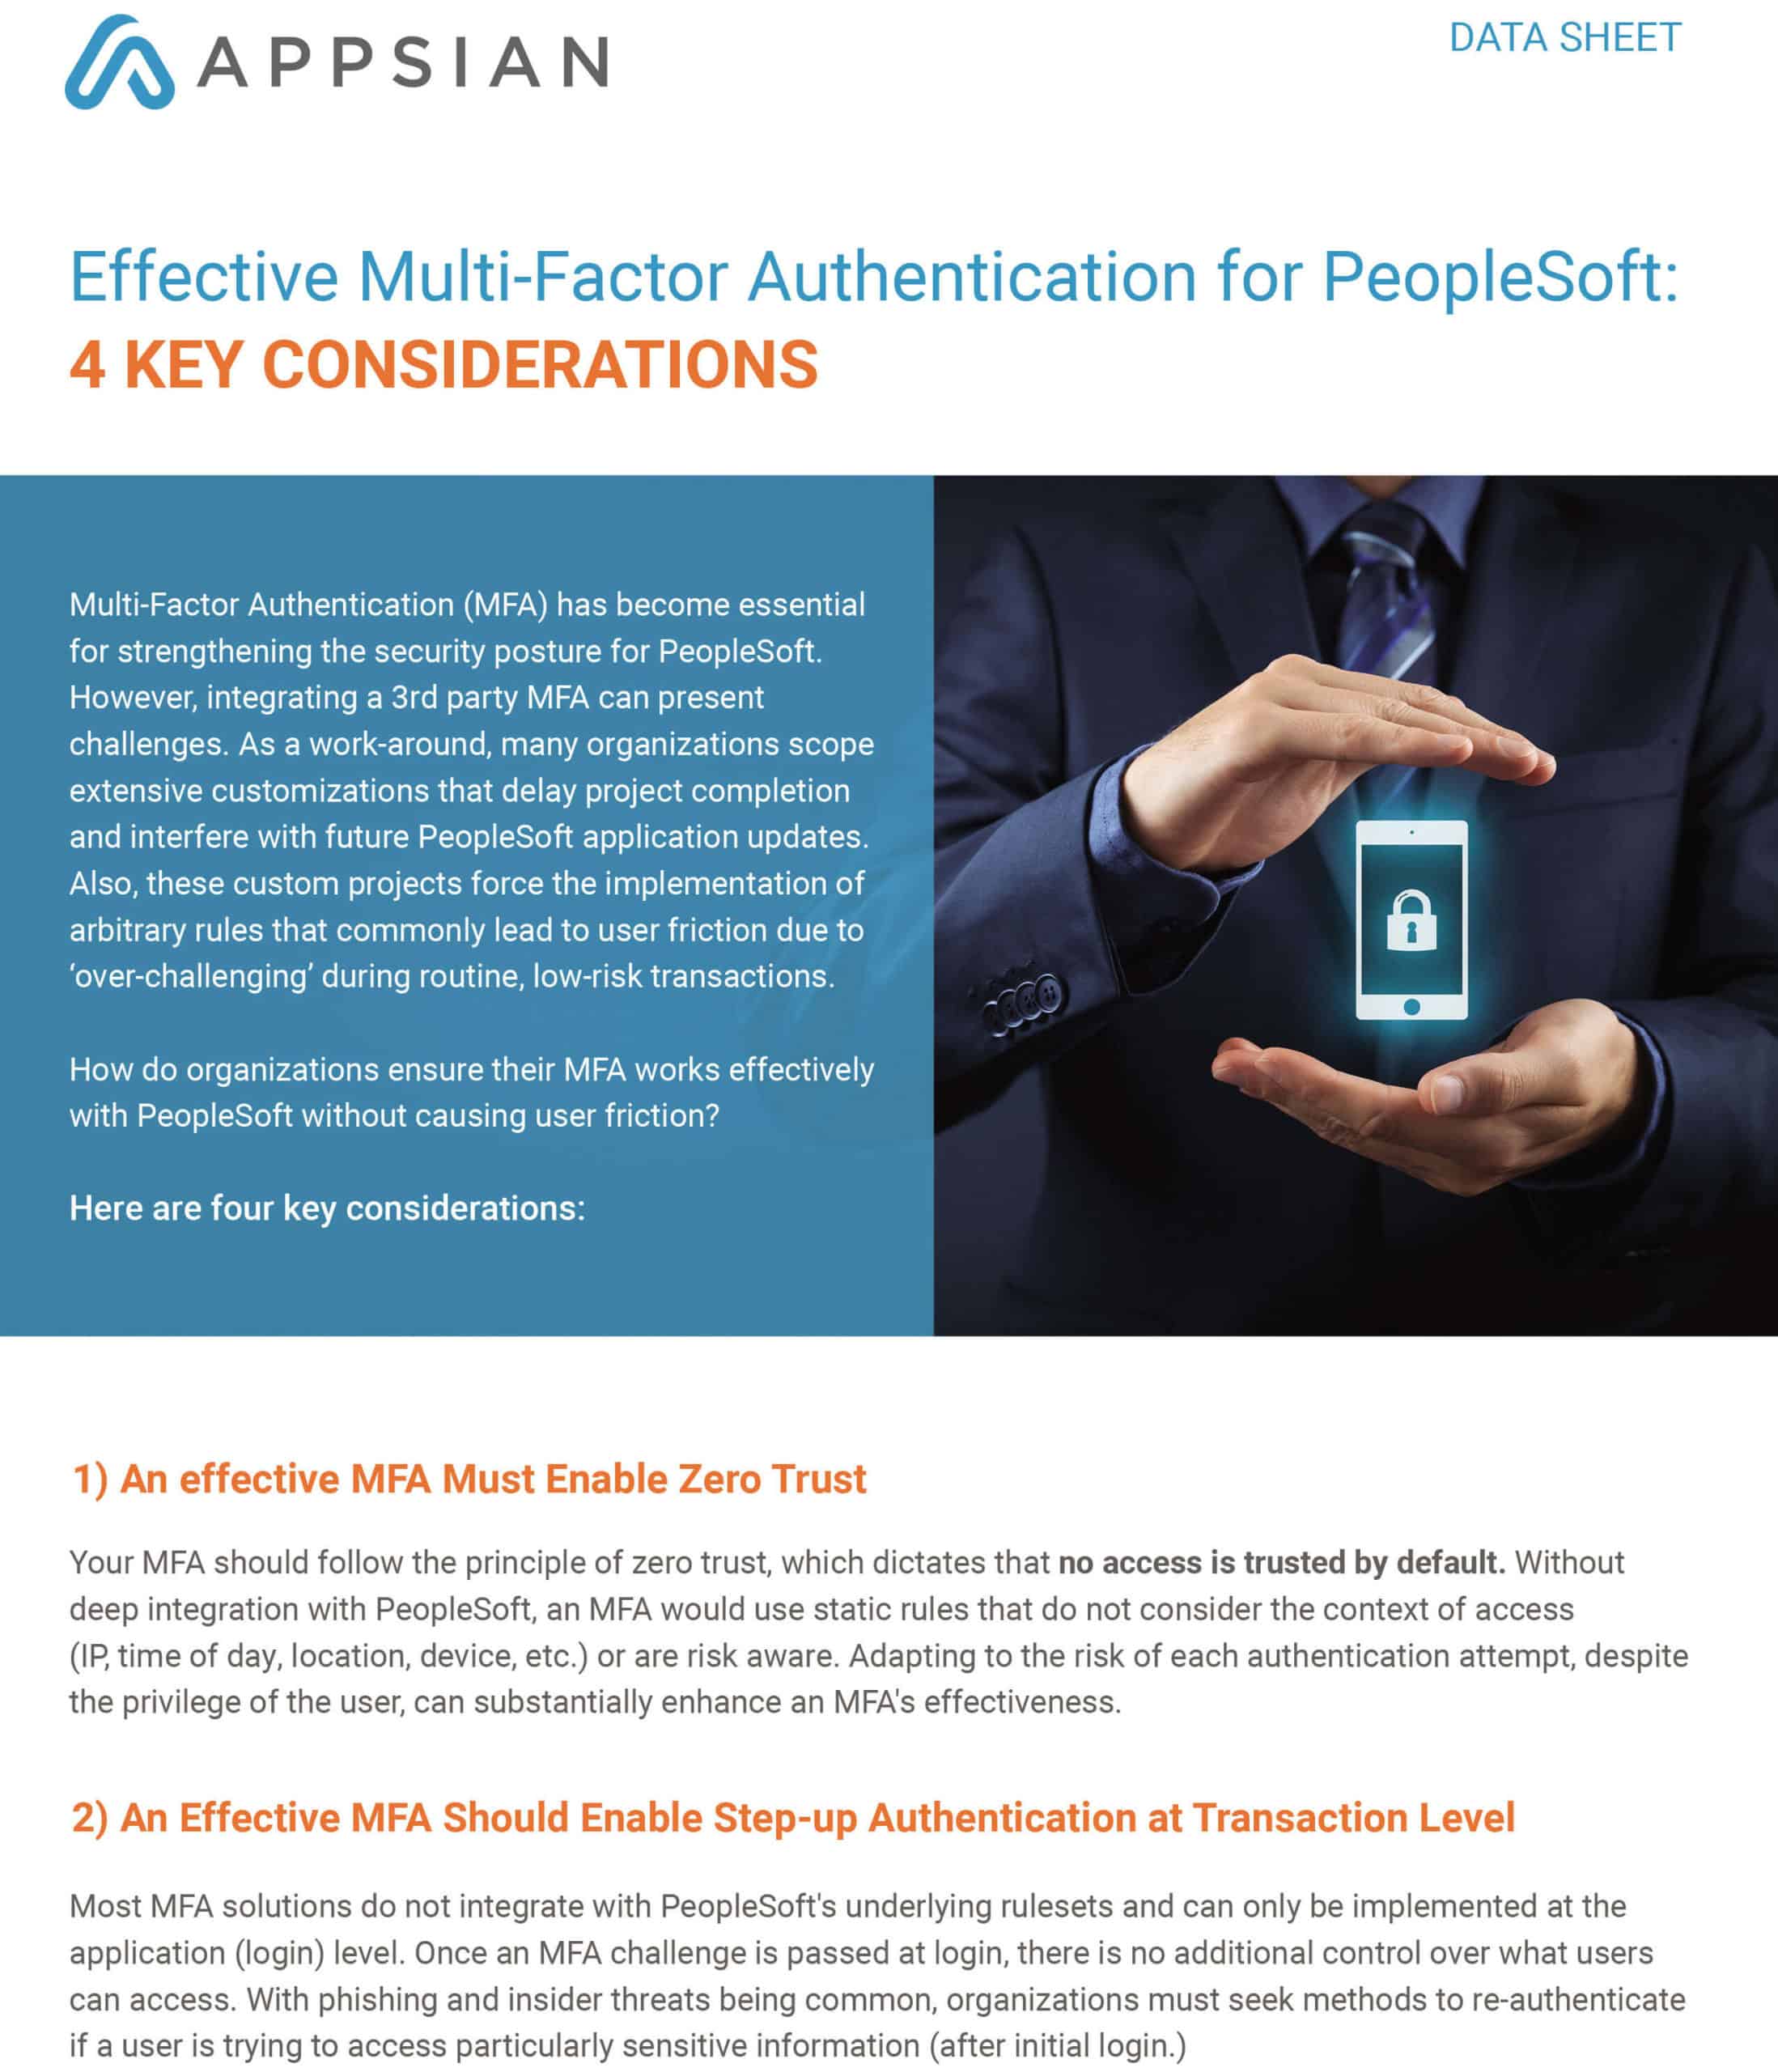 Effective Multi-Factor Authentication for PeopleSoft